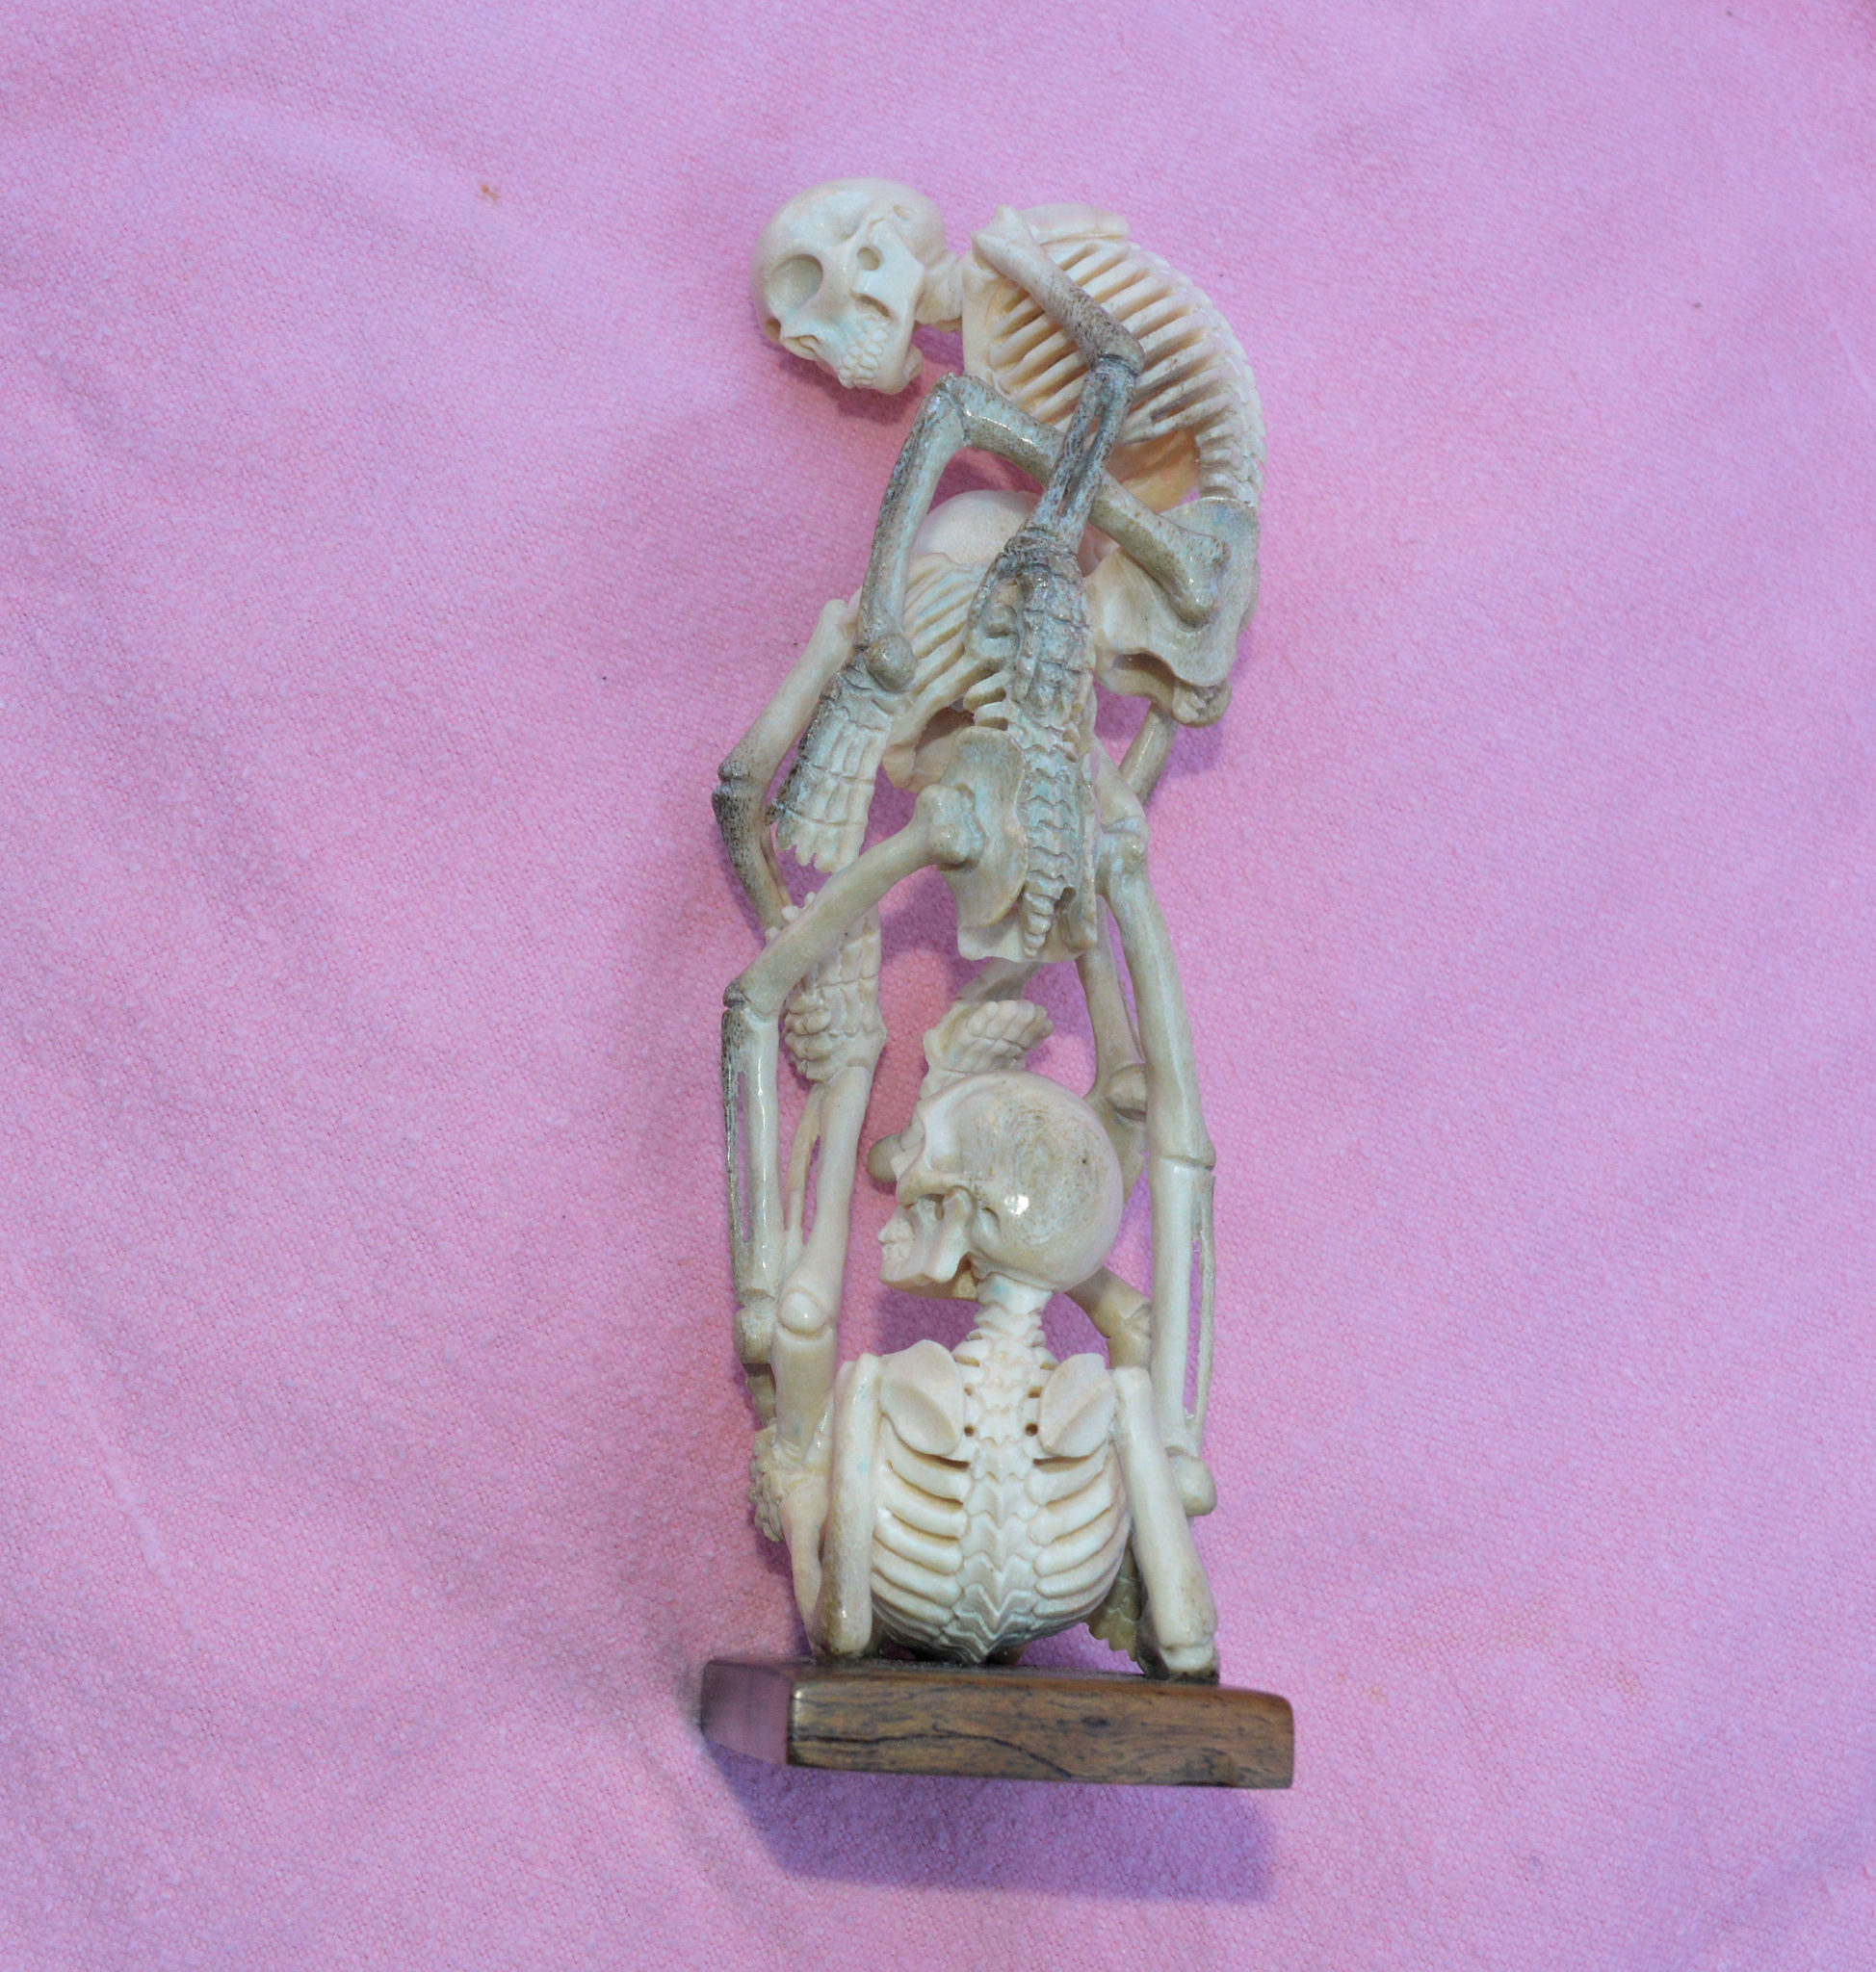 Whalebone Carved Skeletons. Possibly considered Erotic.